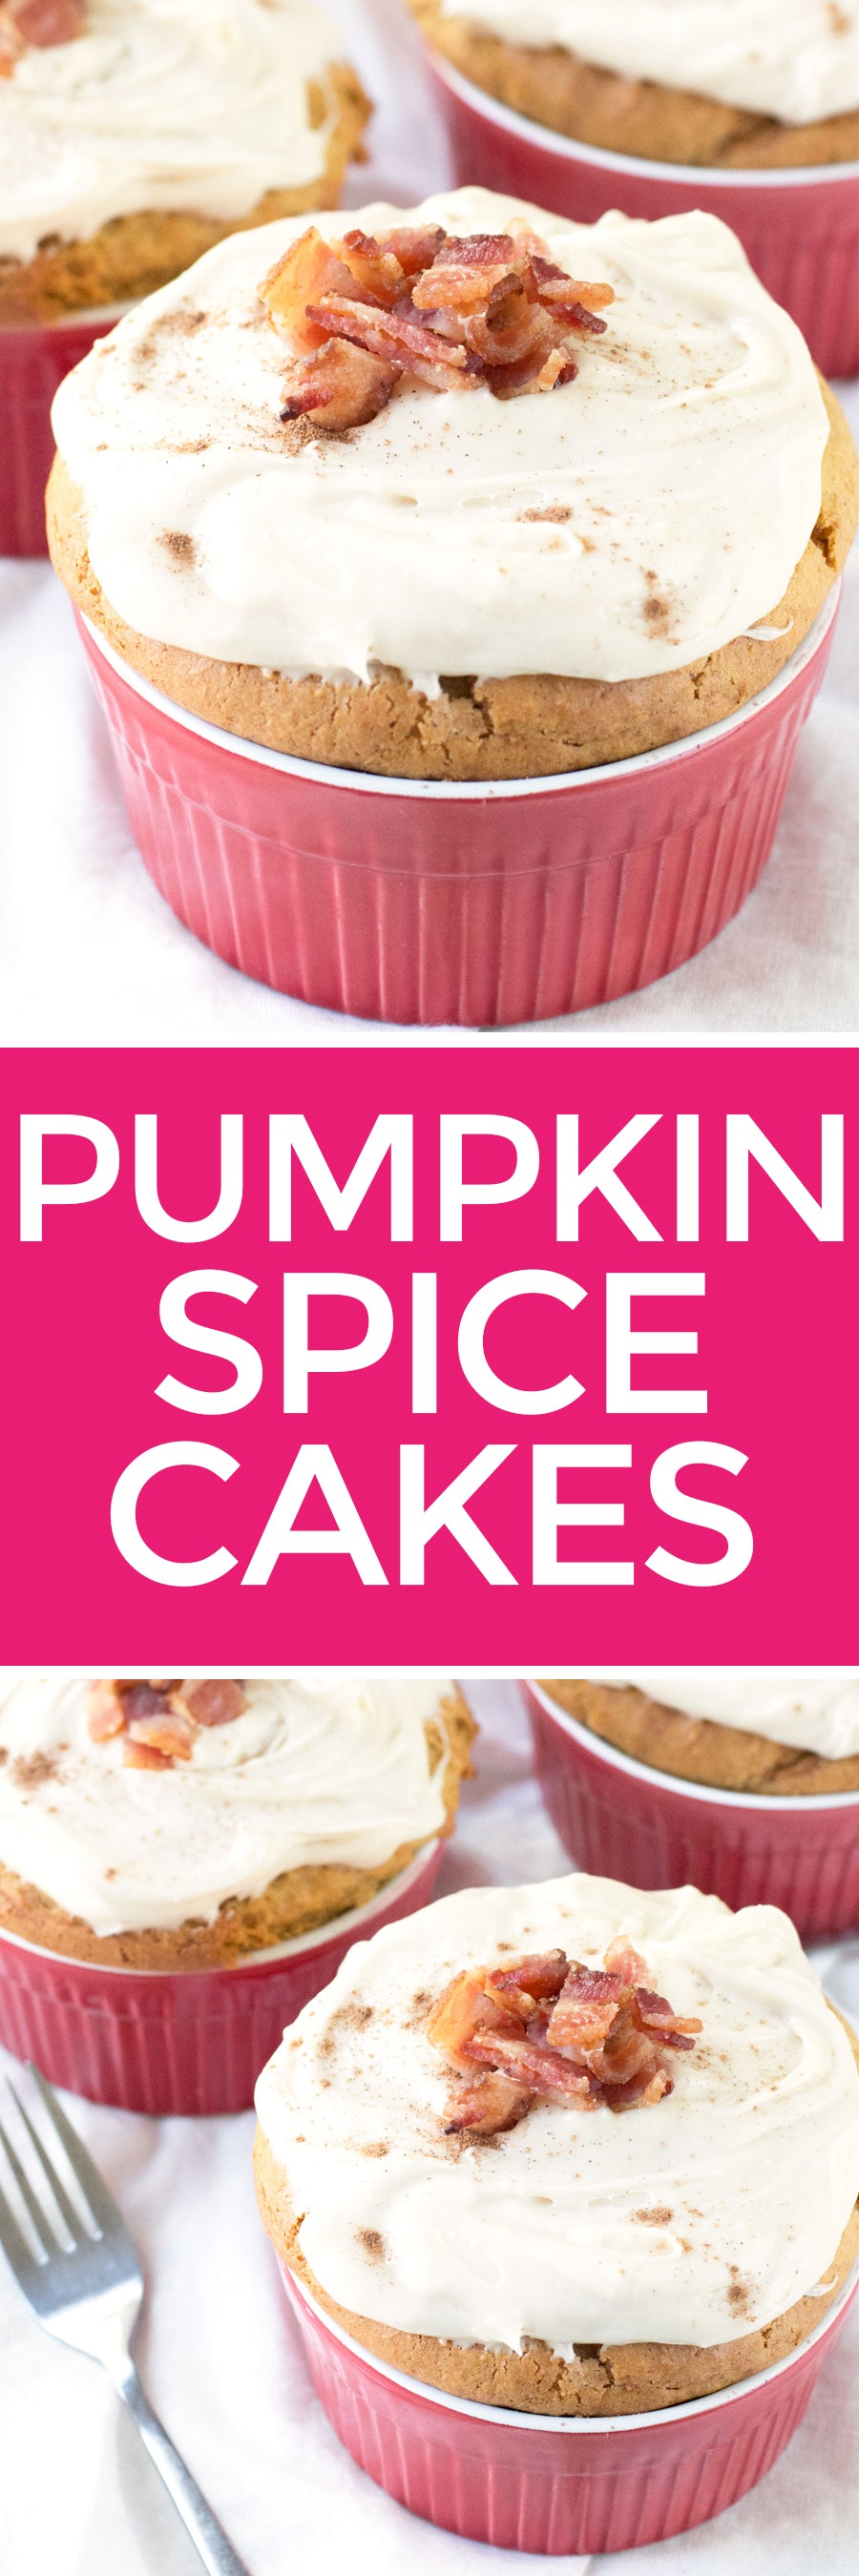 Individual Pumpkin Spice Cakes with Candied Bacon | pigofthemonth.com #dessert #pumpkinspice